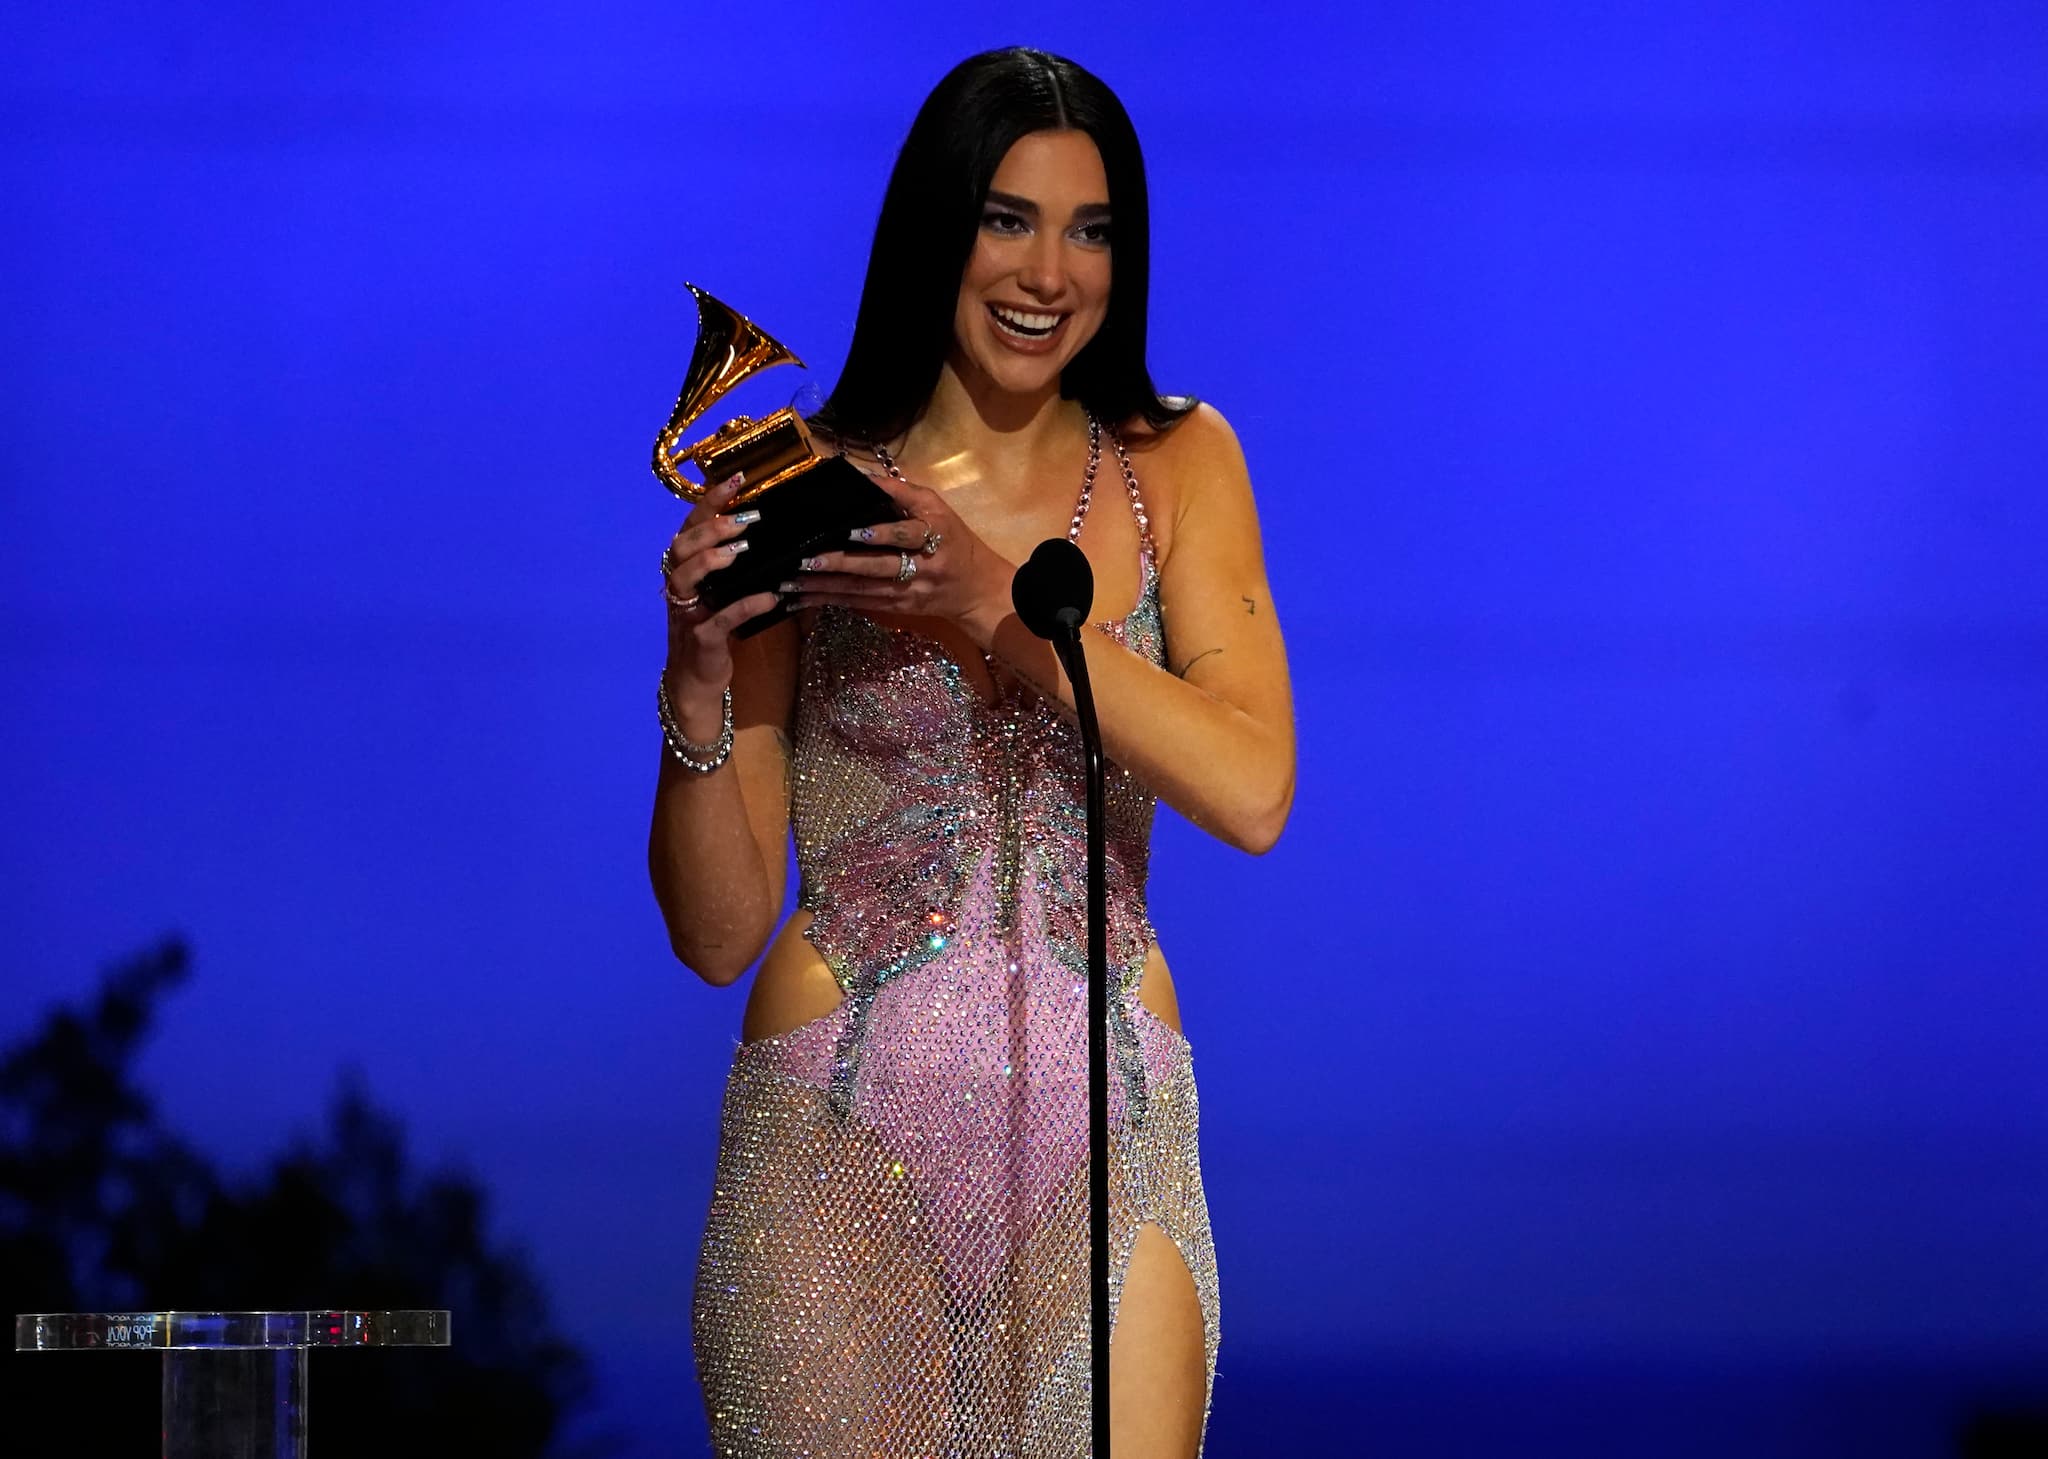 Dua Lipa accepts the award for best pop vocal album for "Future Nostalgia" at the 63rd annual Grammy Awards at the Los Angeles Convention Center on Sunday, March 14, 2021. (AP Photo/Chris Pizzello)